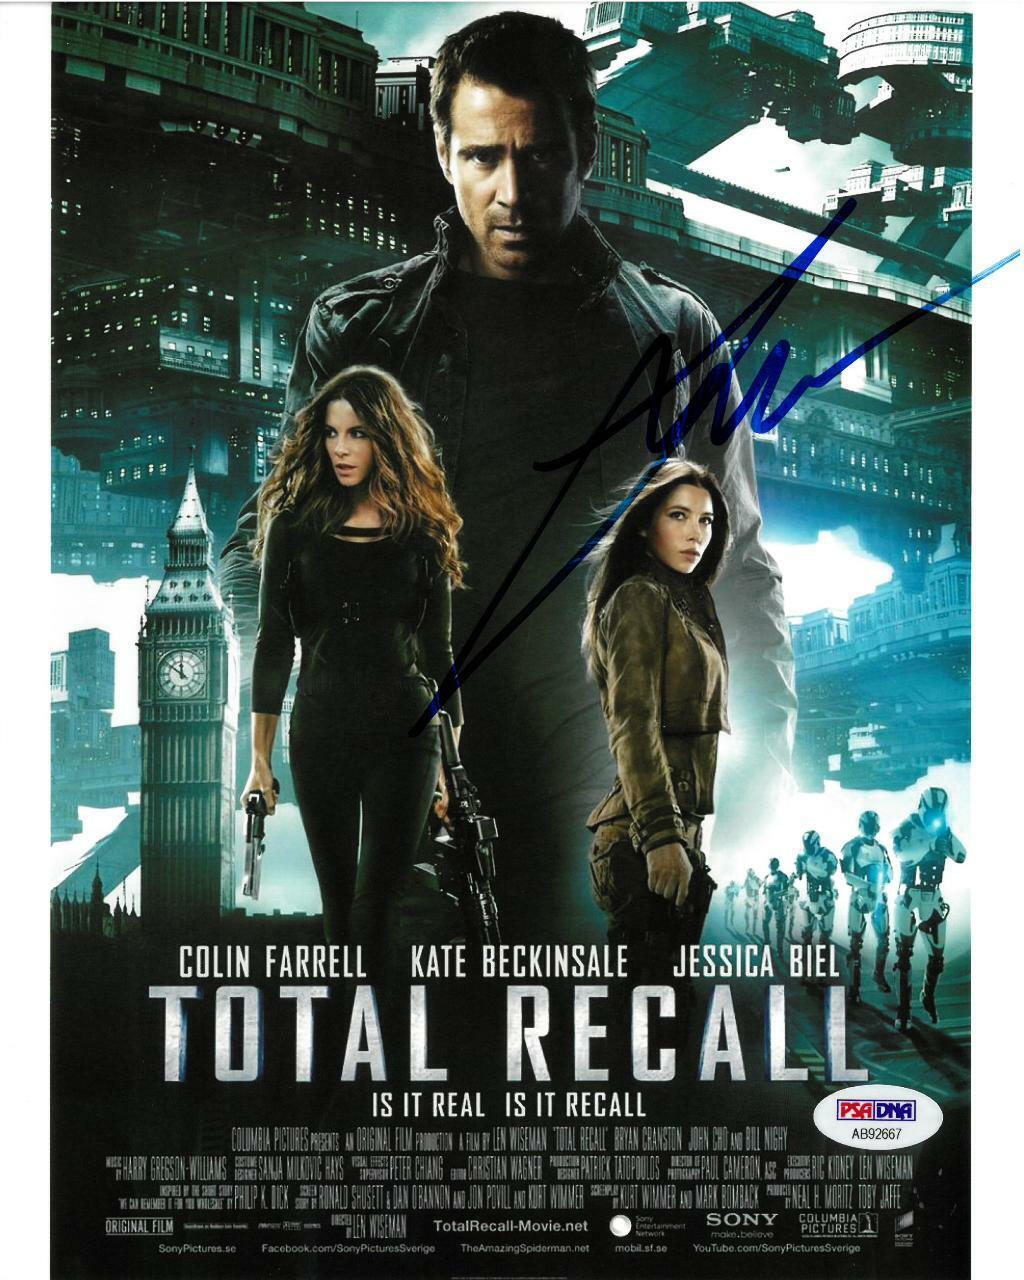 Len Wiseman Signed Total Recall Authentic Autographed 8x10 Photo Poster painting PSA/DNA#AB92667